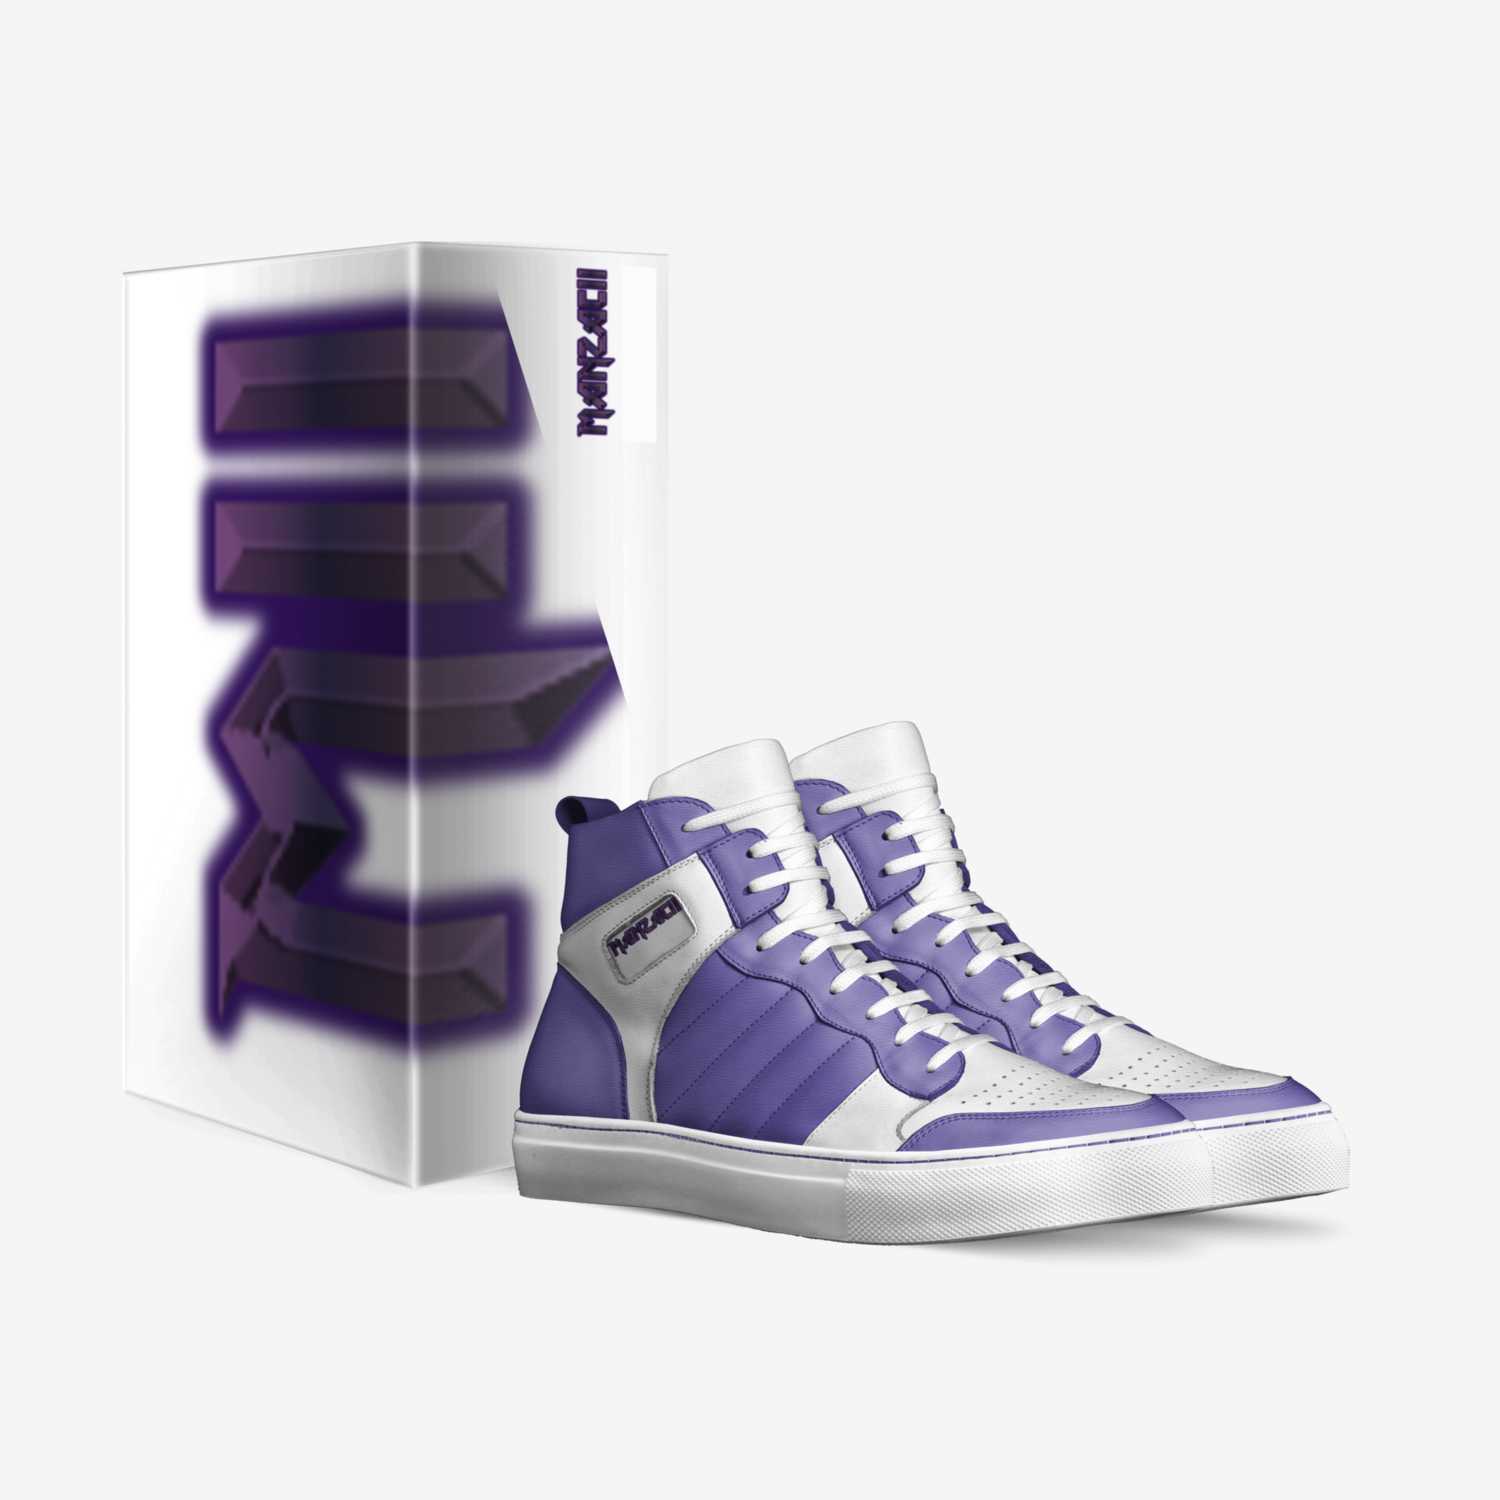 M11 Purple Chrome custom made in Italy shoes by Sime'On Mayfield | Box view